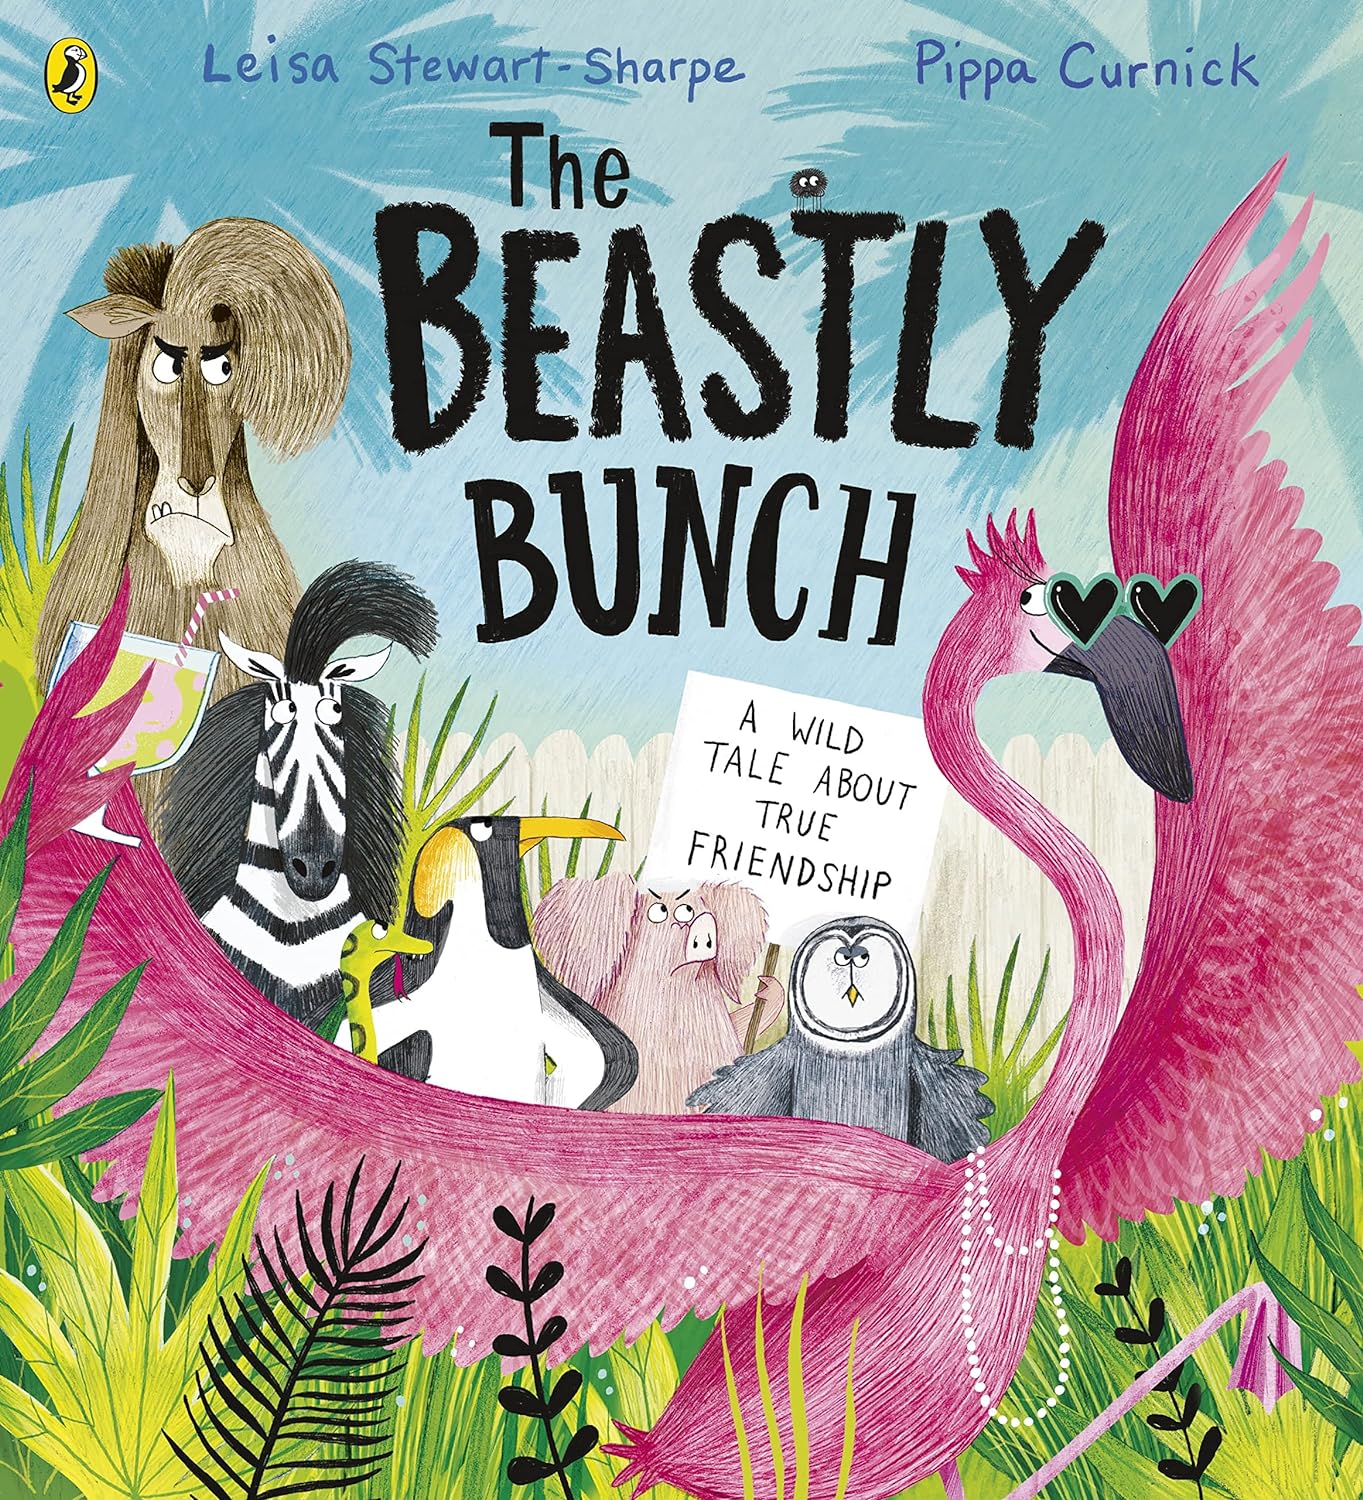 Front cover of The Beastly Bunch by Leisa Stewart-Sharpe (illustrated by Pippa Curnick)